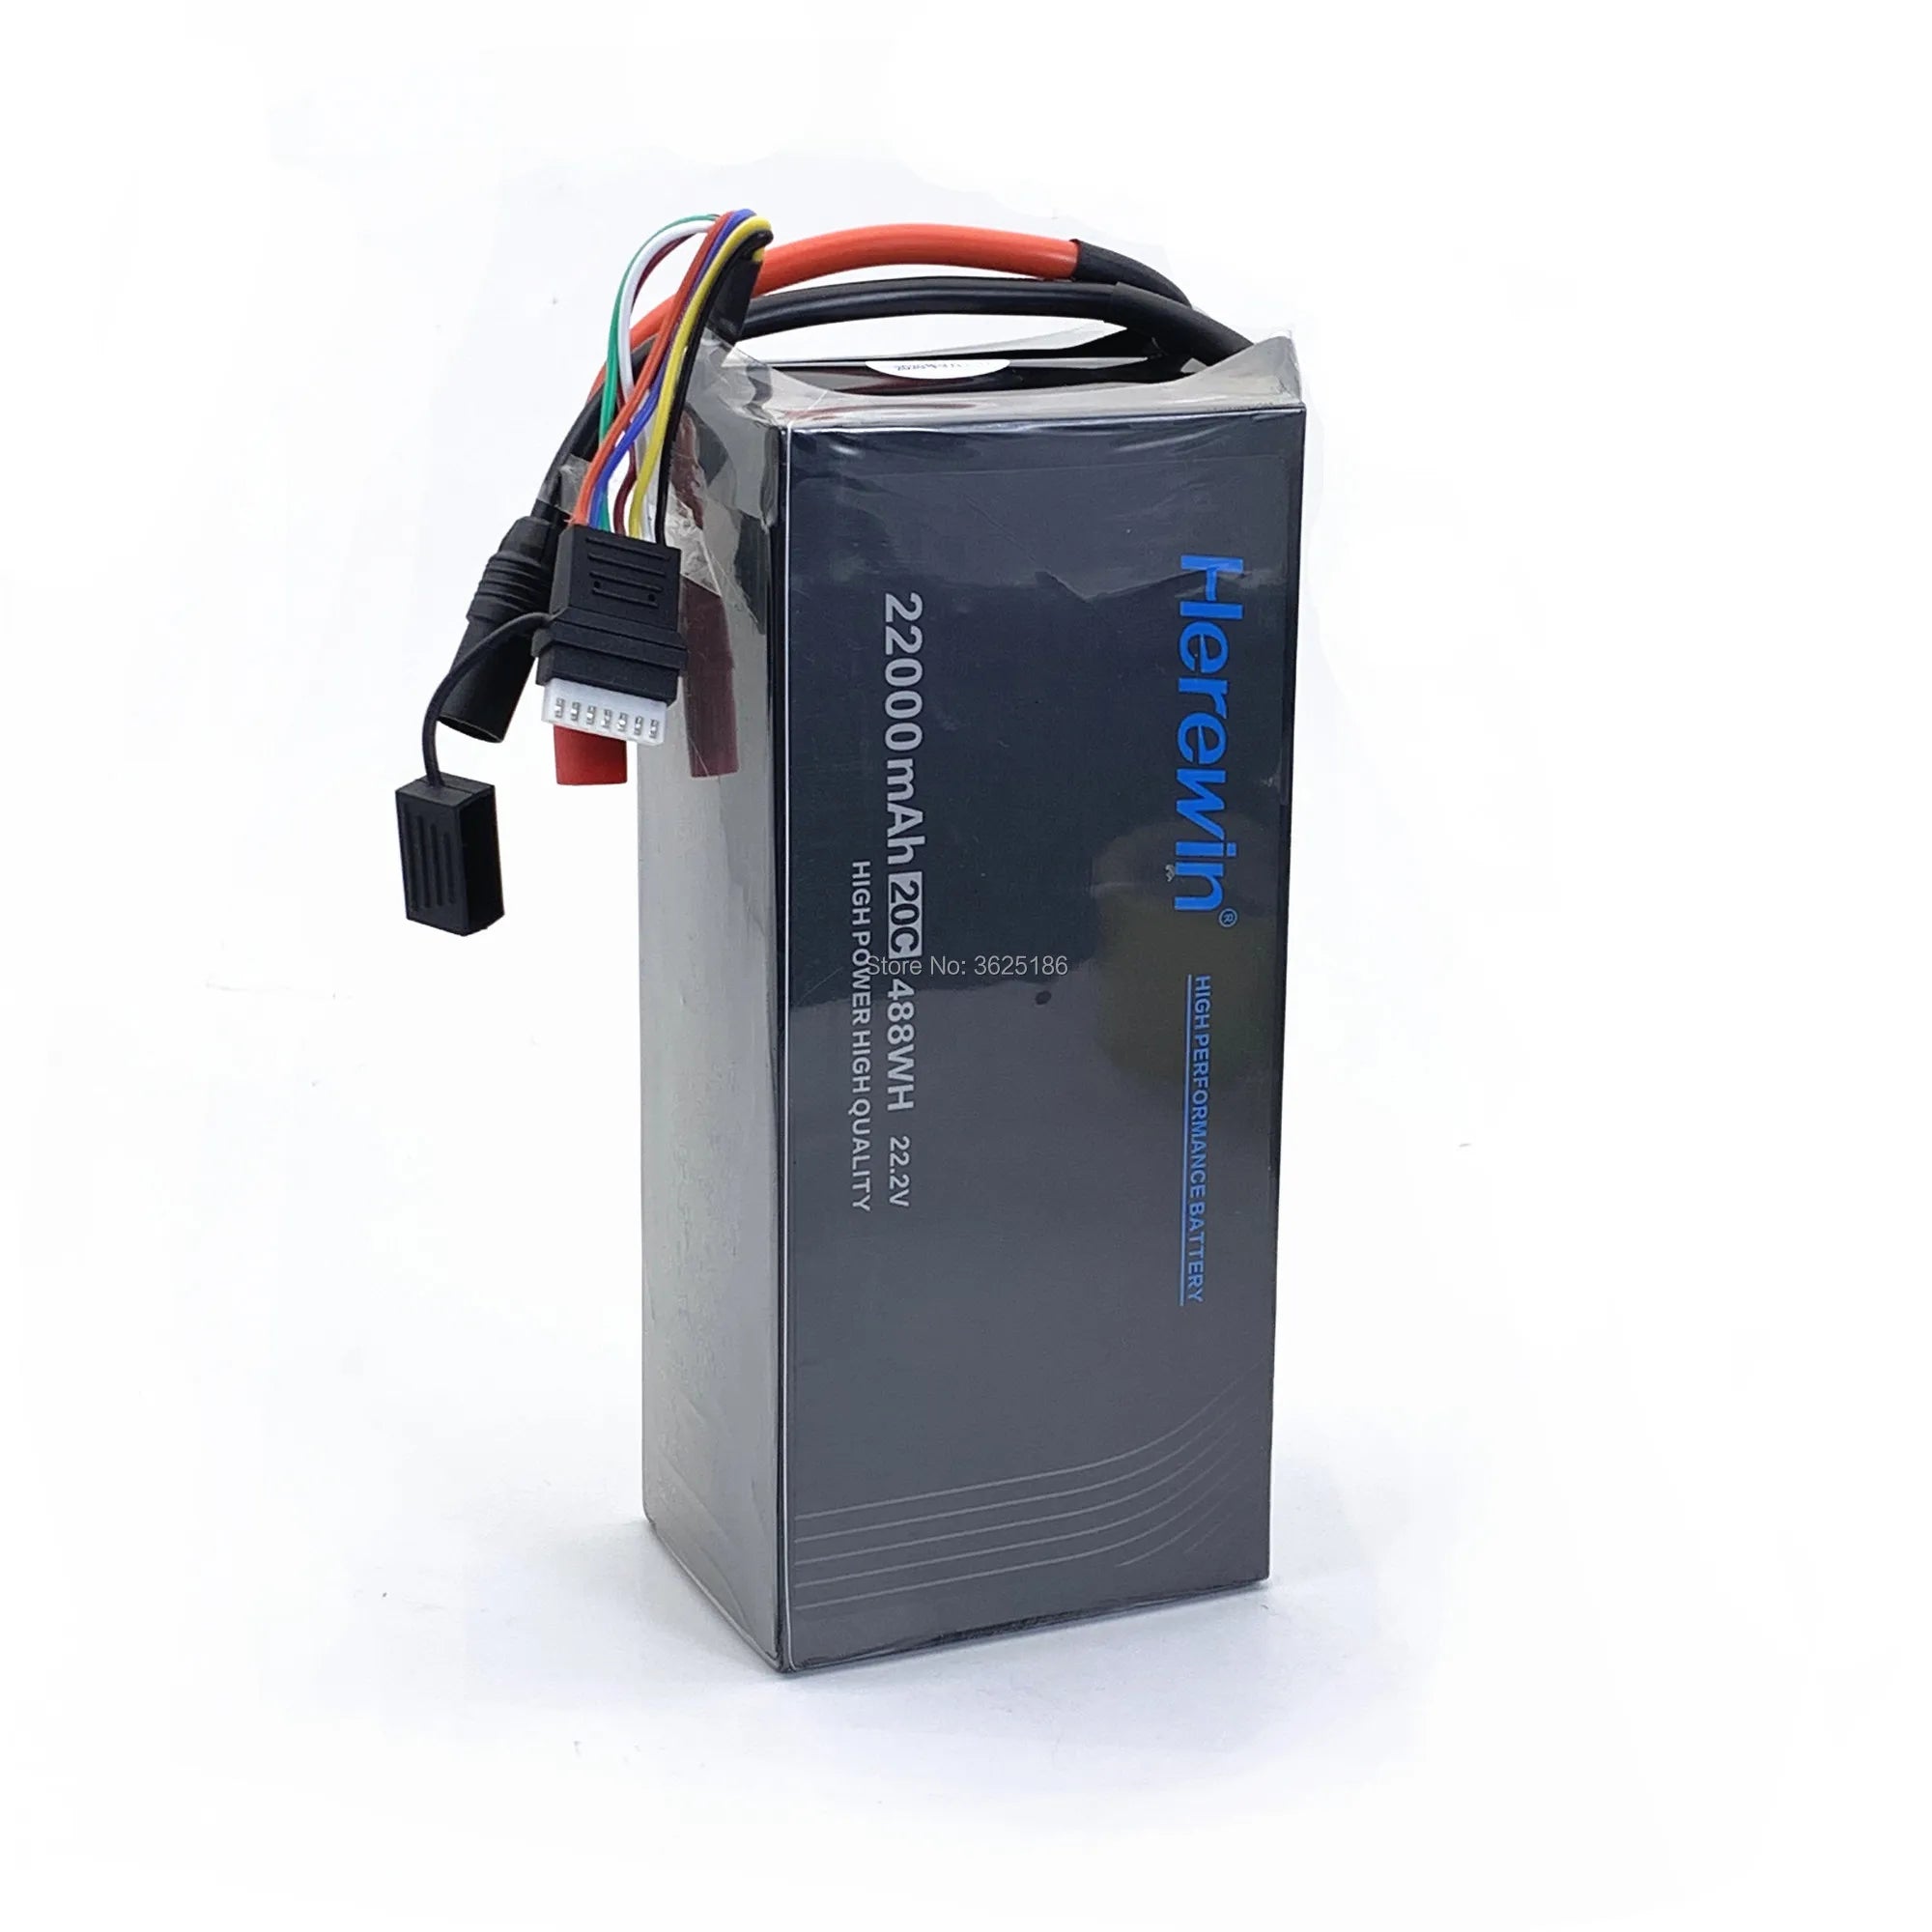 22000mah 22.2v 20C Agriculture Drone Battery SPECIFICATION